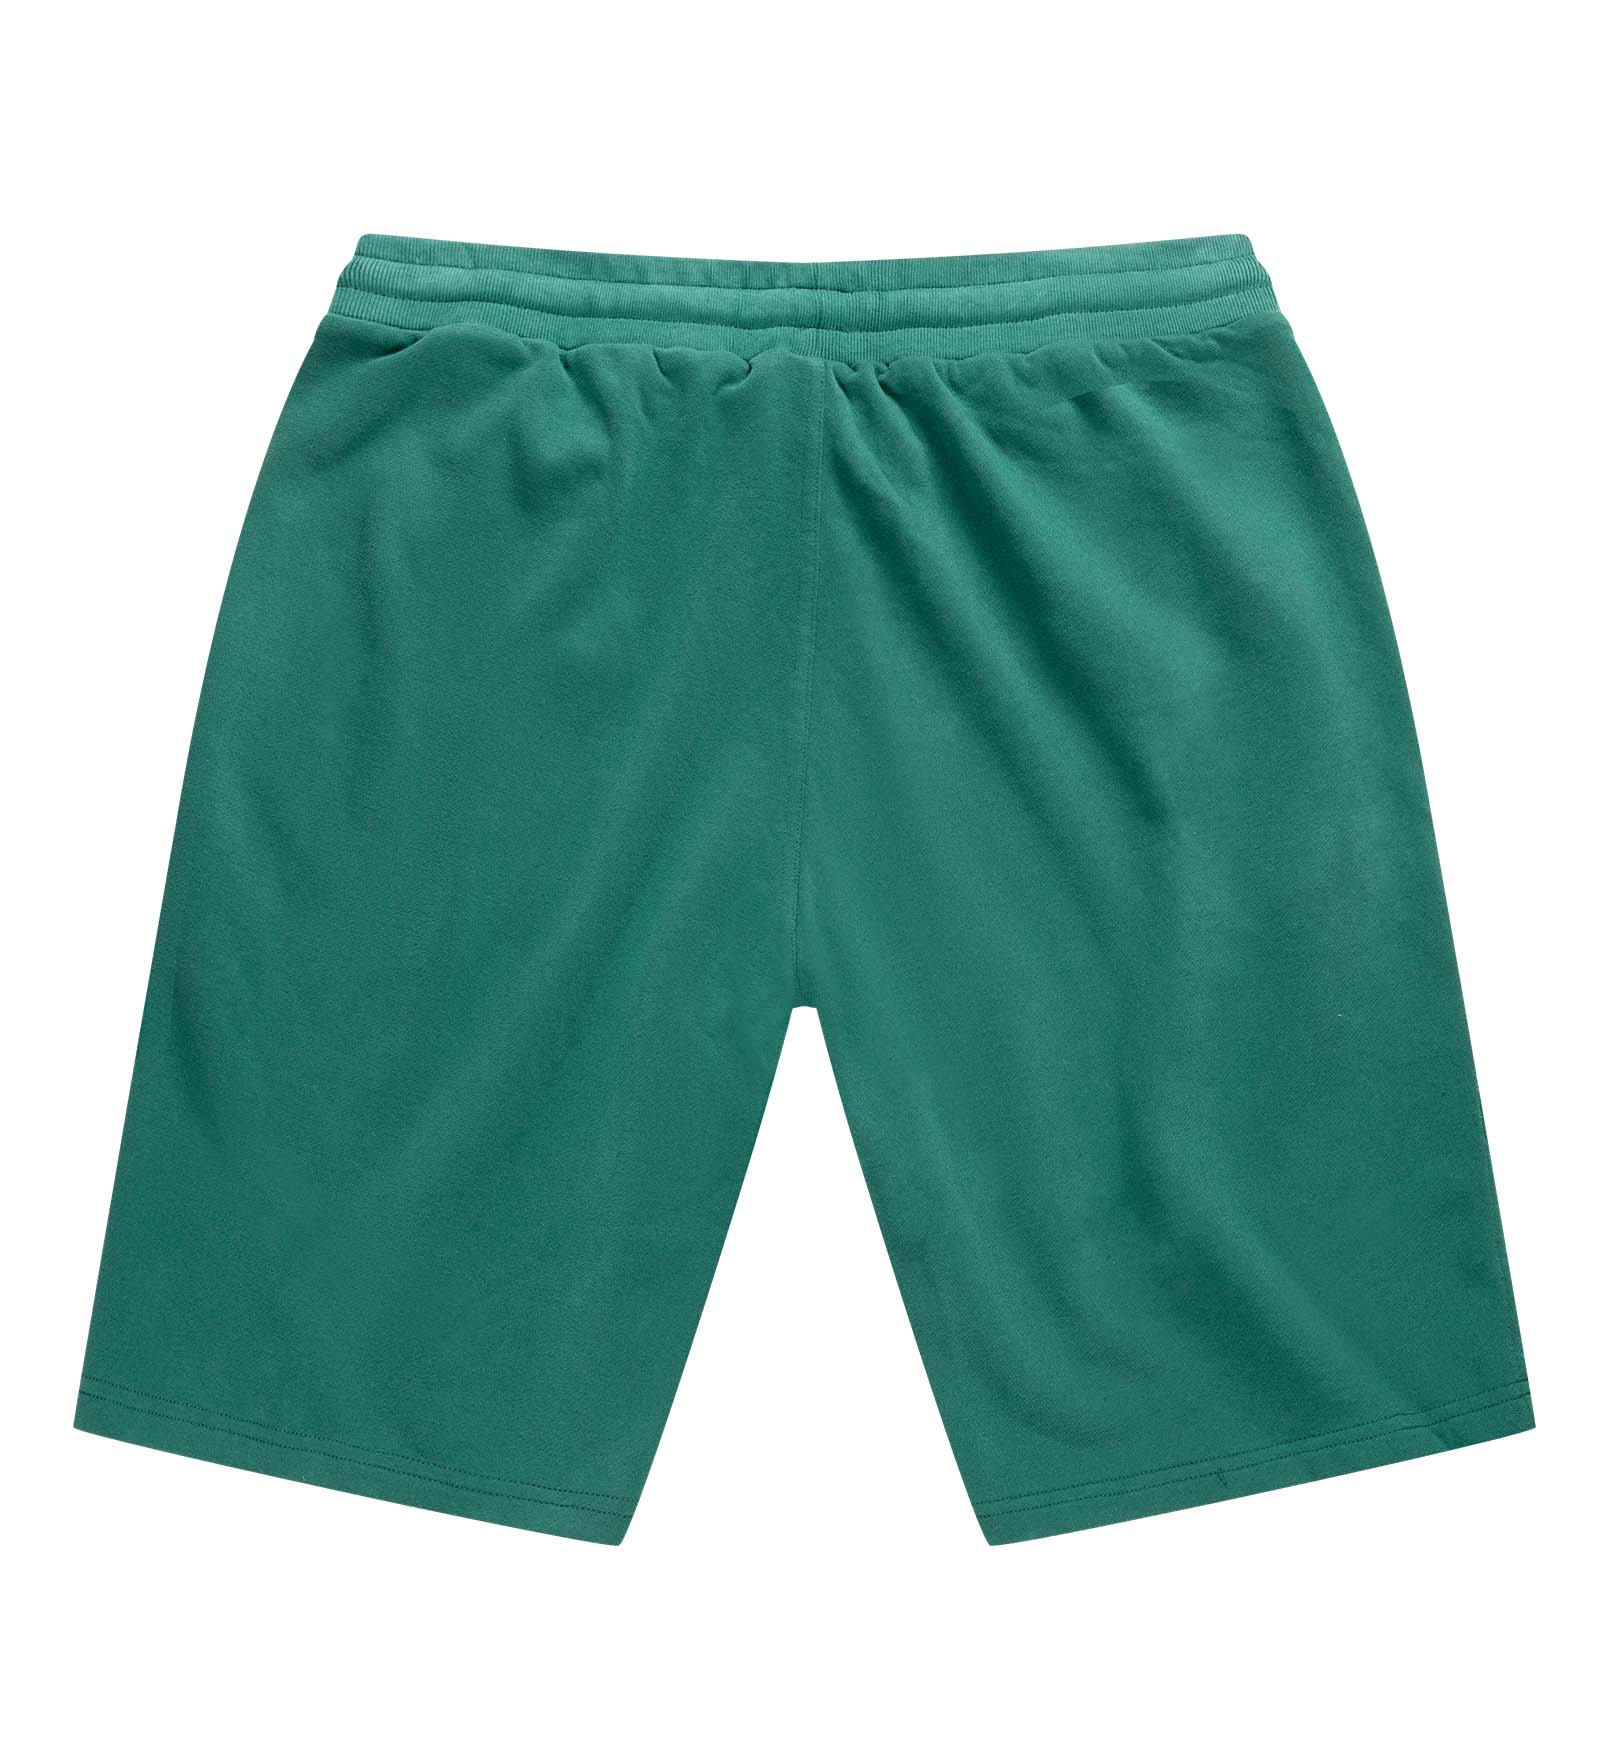 Sweat Shorts Green for Men and Women 